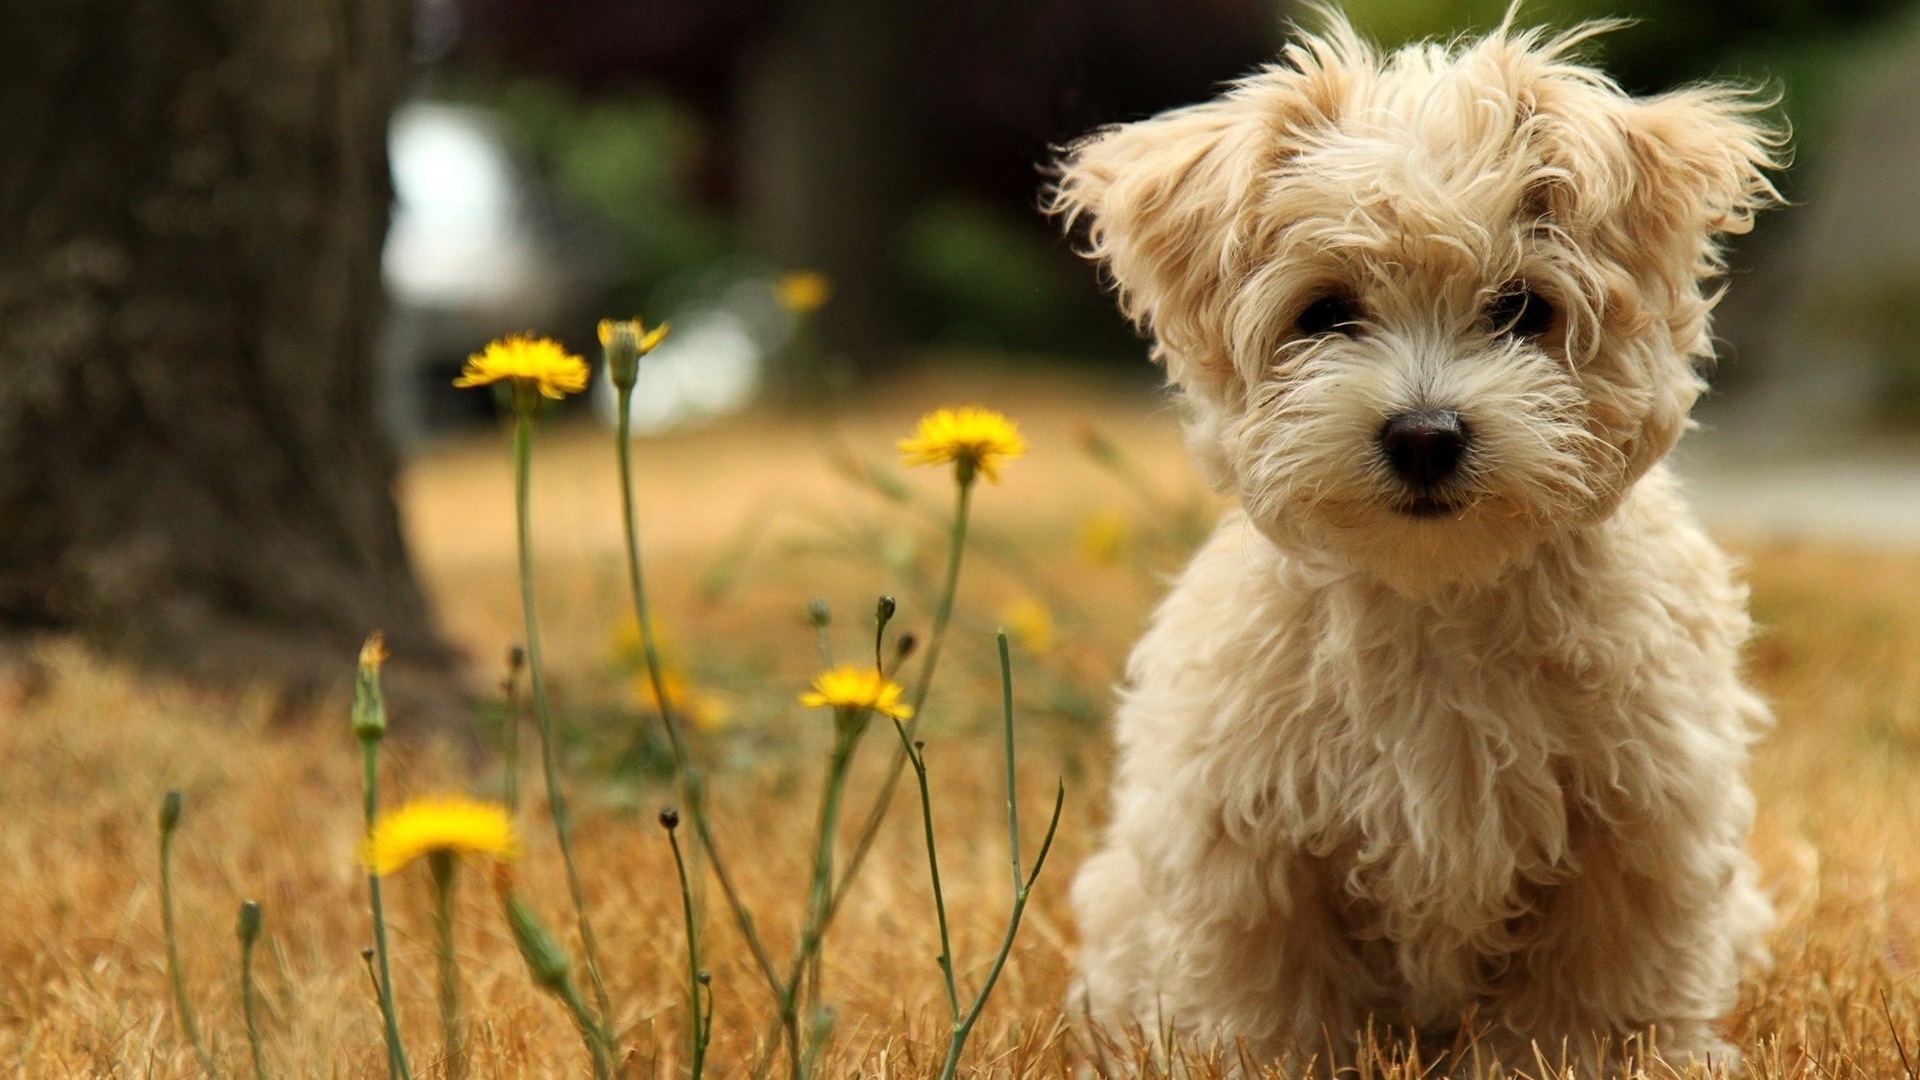 10 New Cute Animal Wallpaper Hd FULL HD 1920×1080 For PC Background